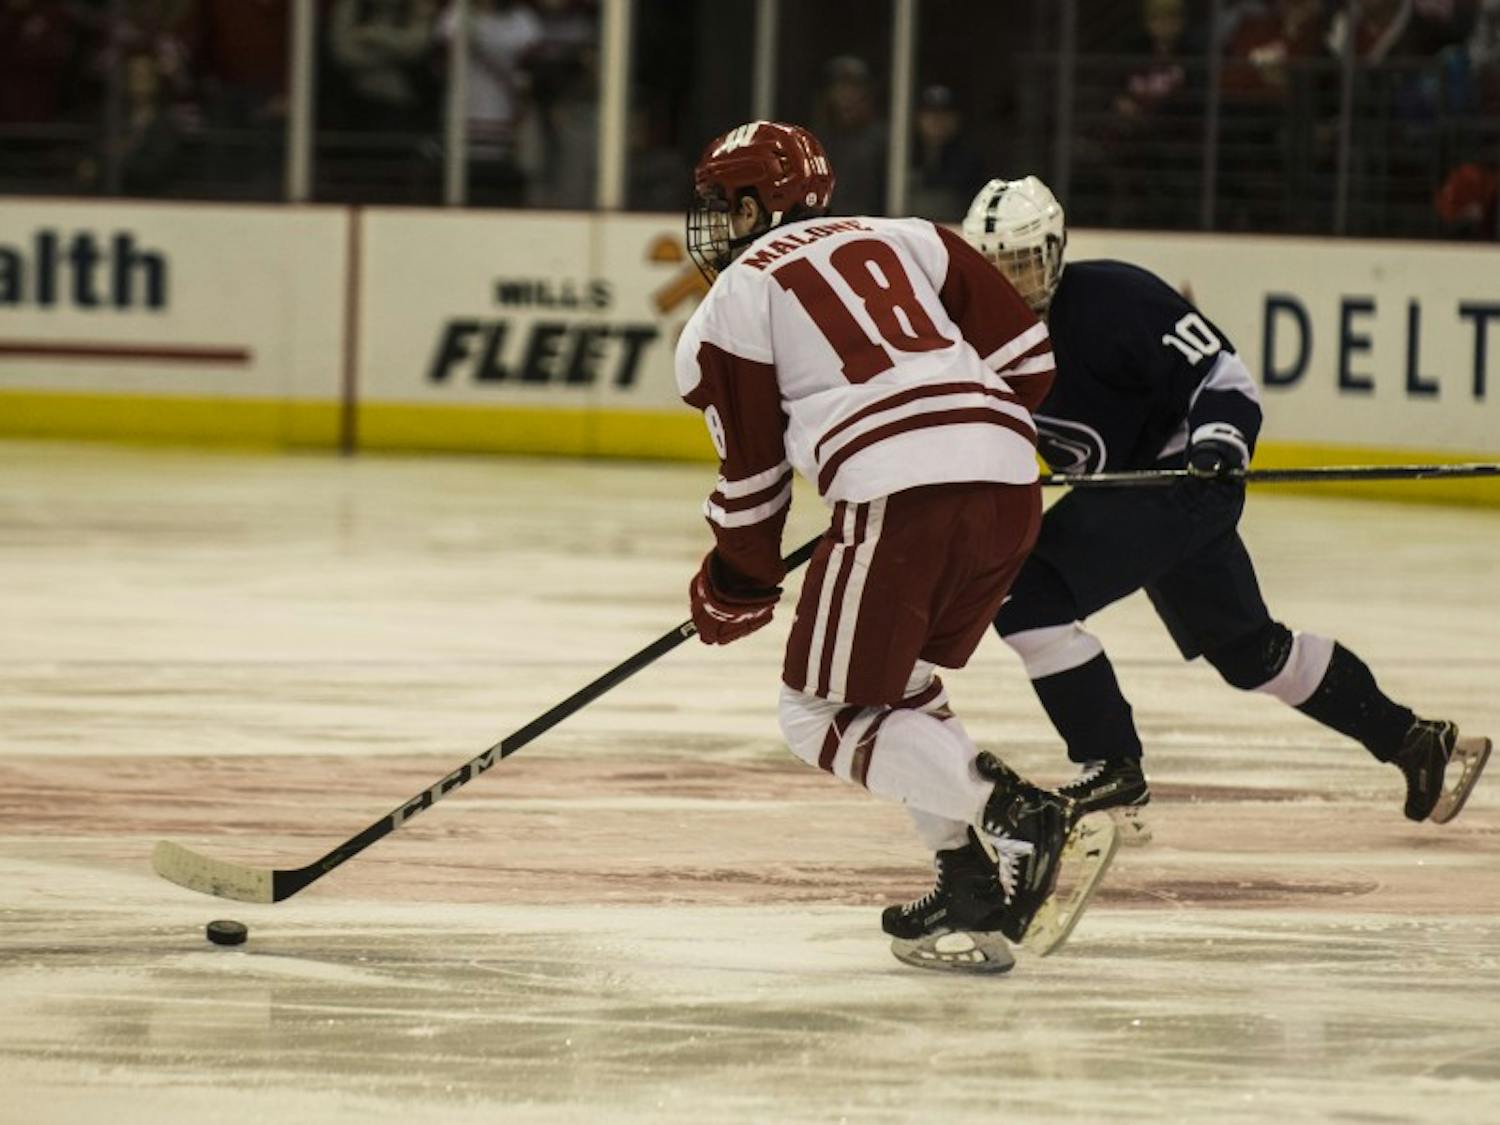 Seamus Malone tallied the opening goal against Michigan Tech, but it wasn't enough as the Badgers allowed too many penalties, and goals, to give themselves a chance at the win.